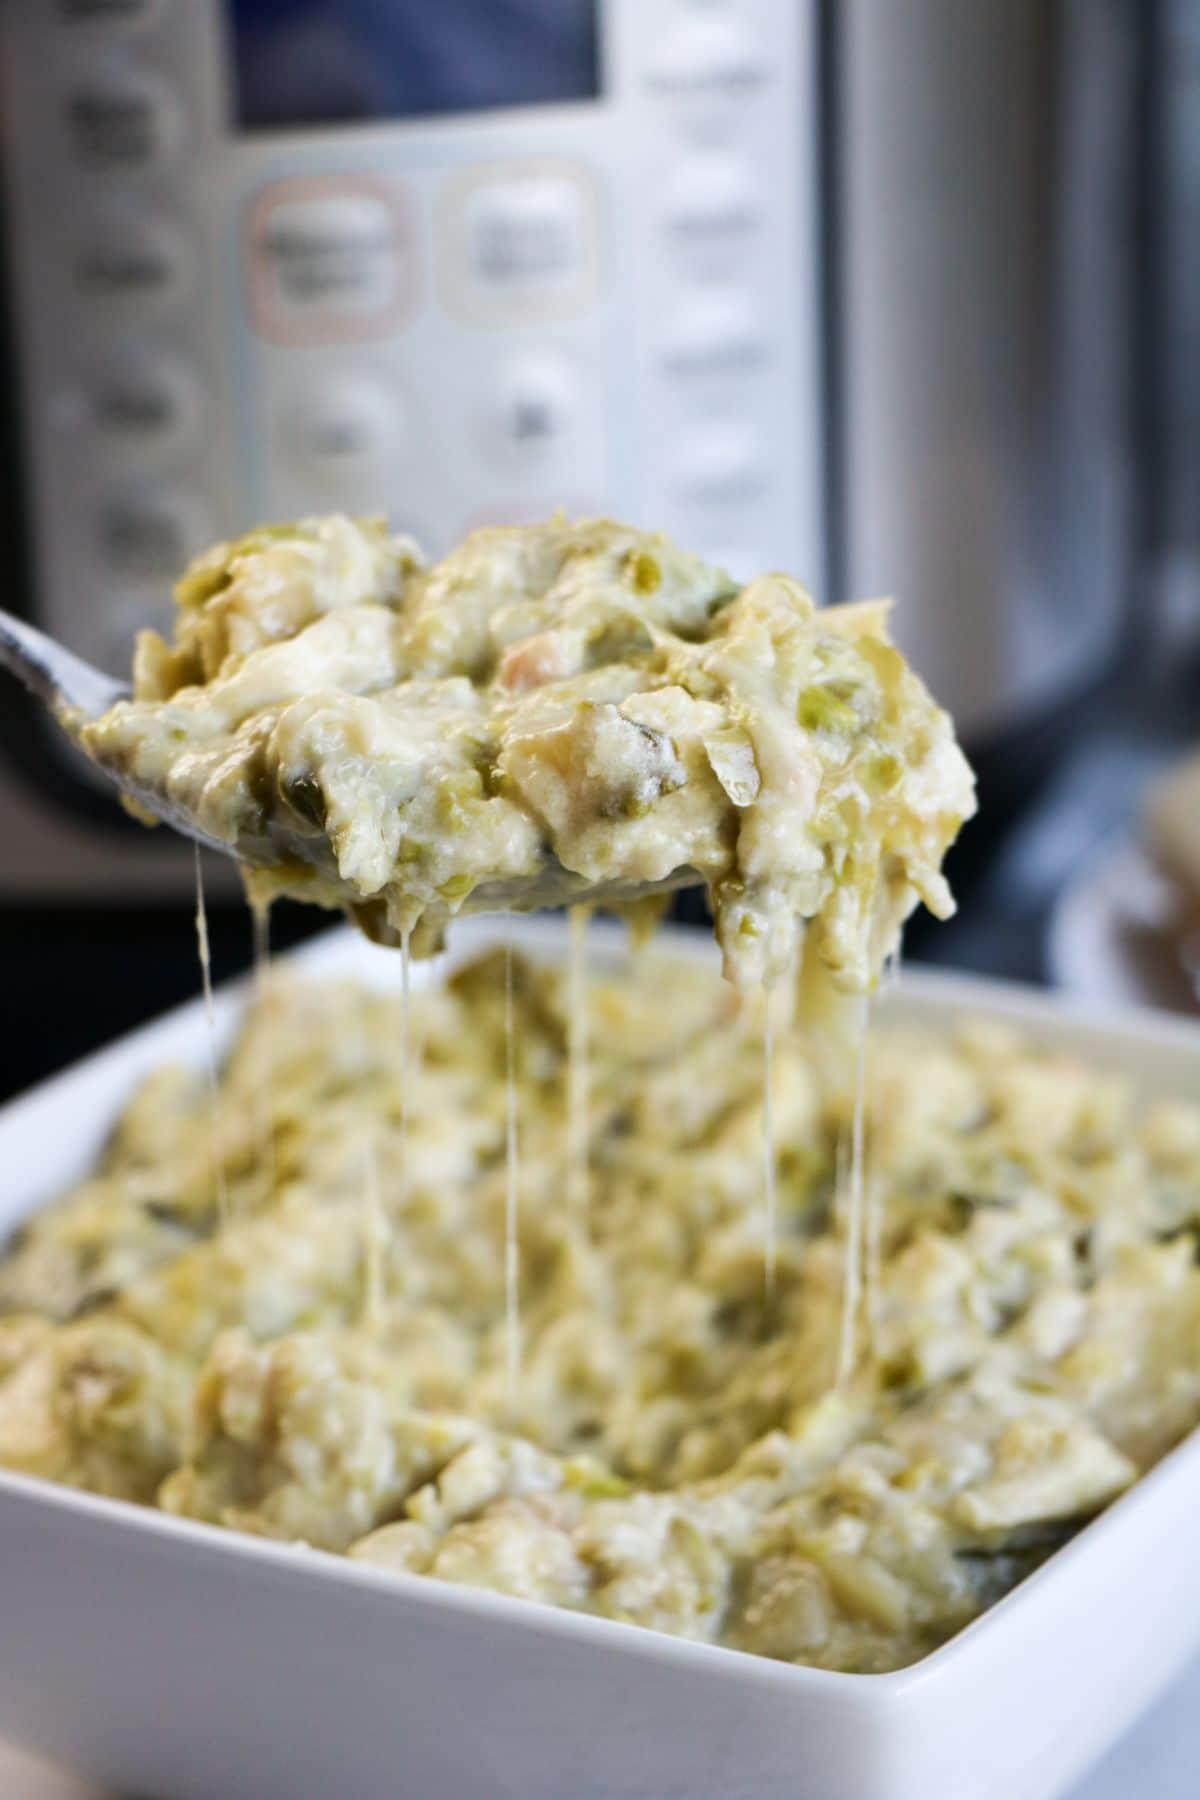 A close up of a spoonful of Instant Pot Creamed Brussel Sprouts.